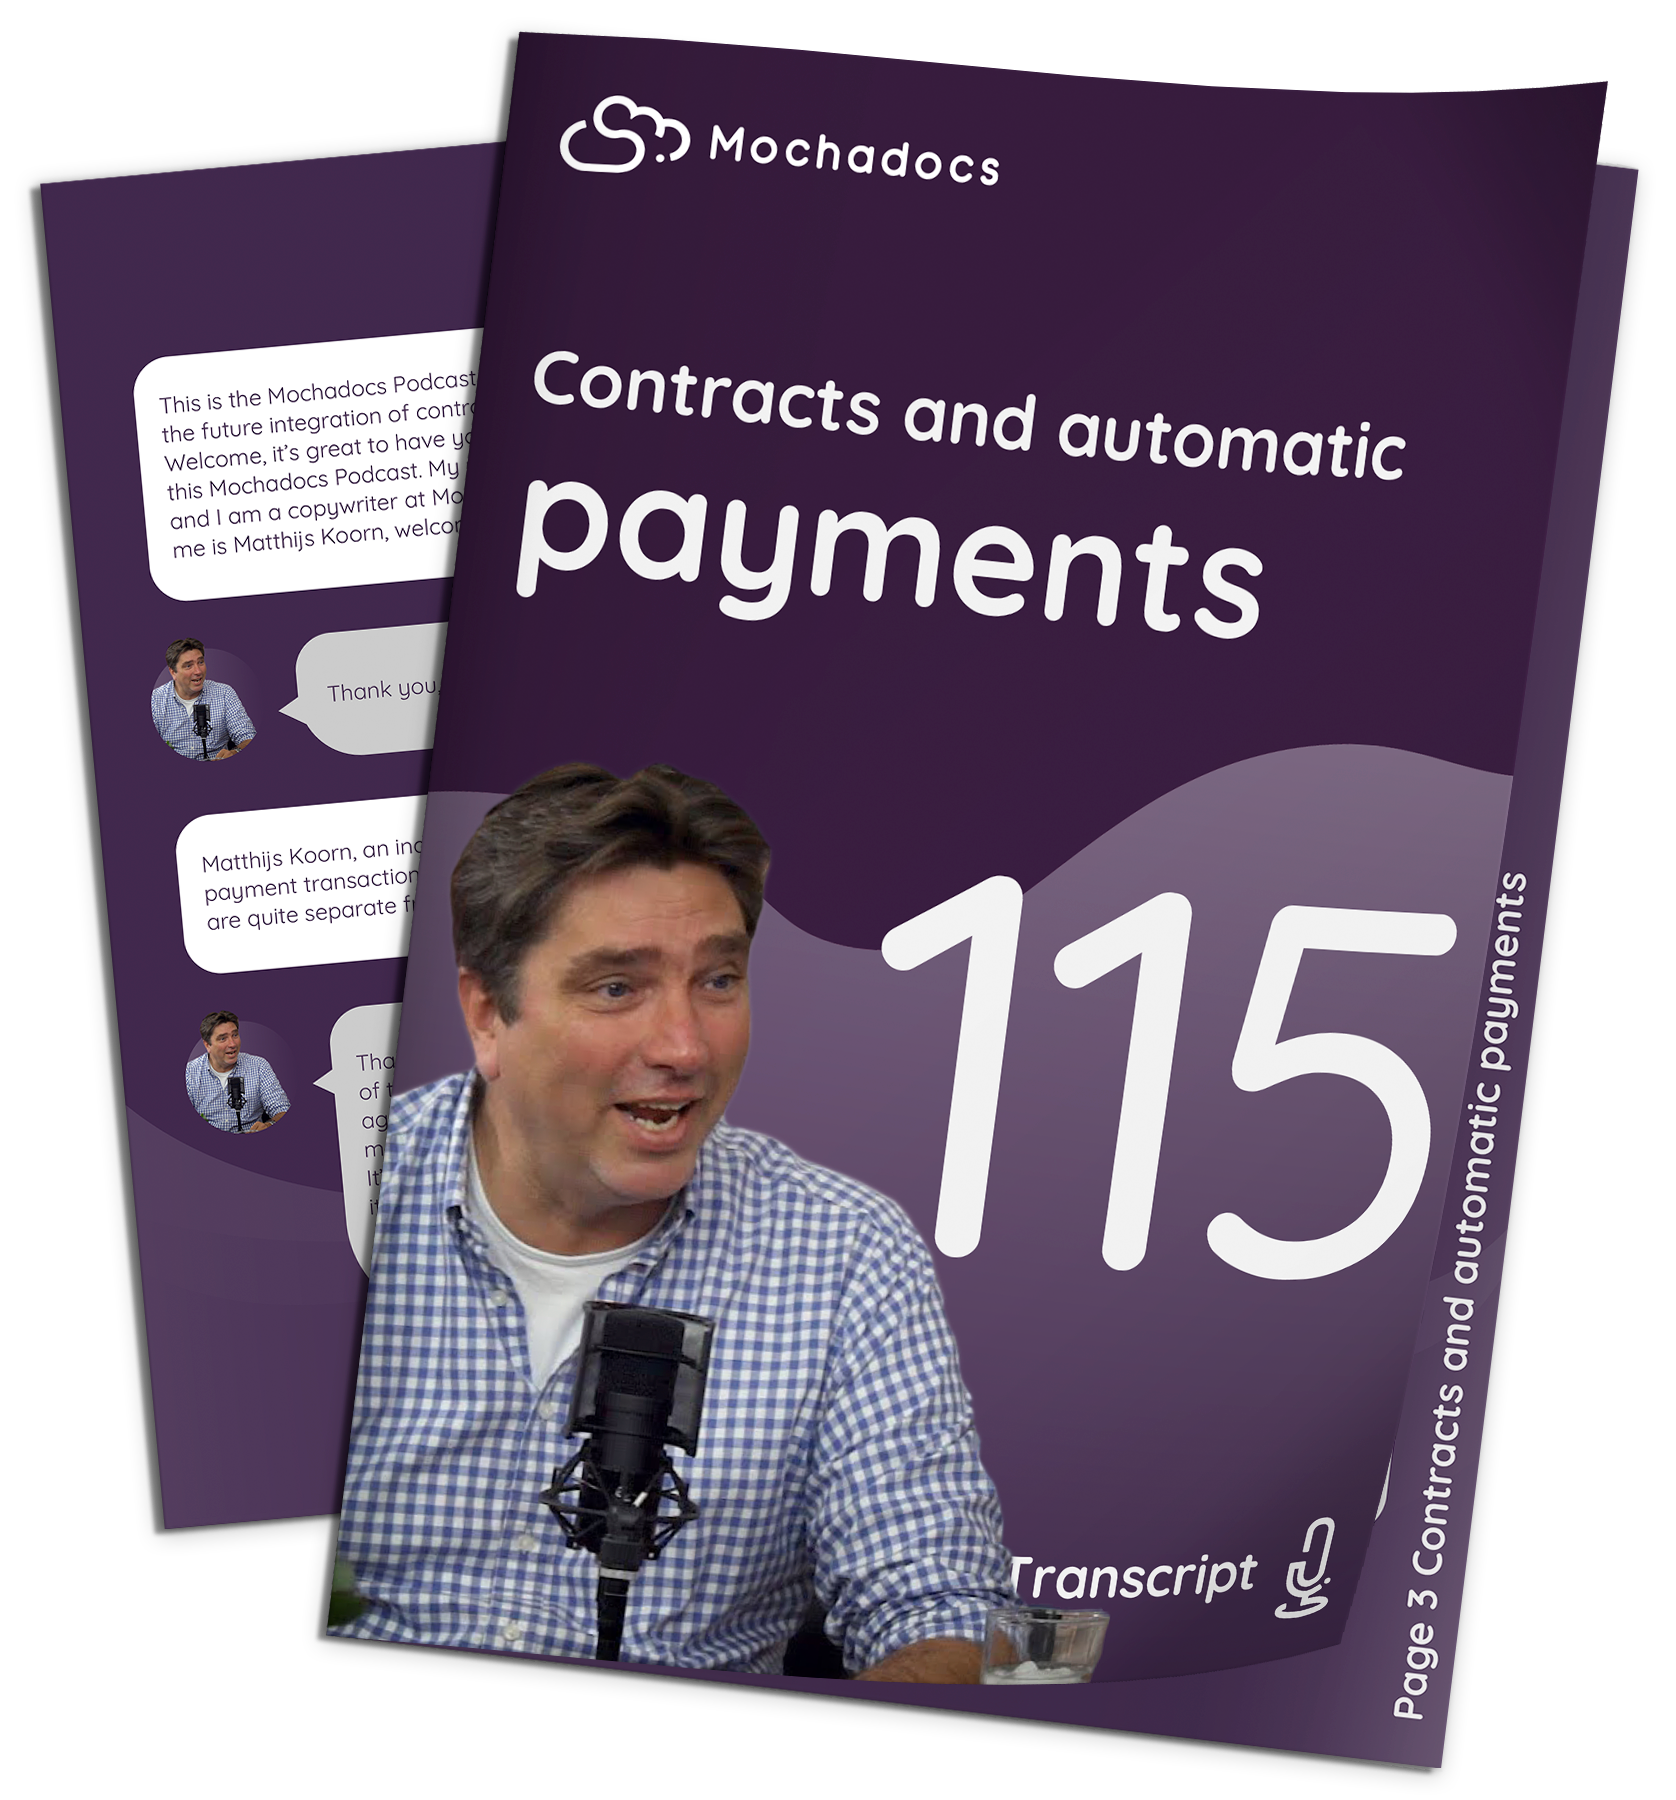 Contracts and automatic payments